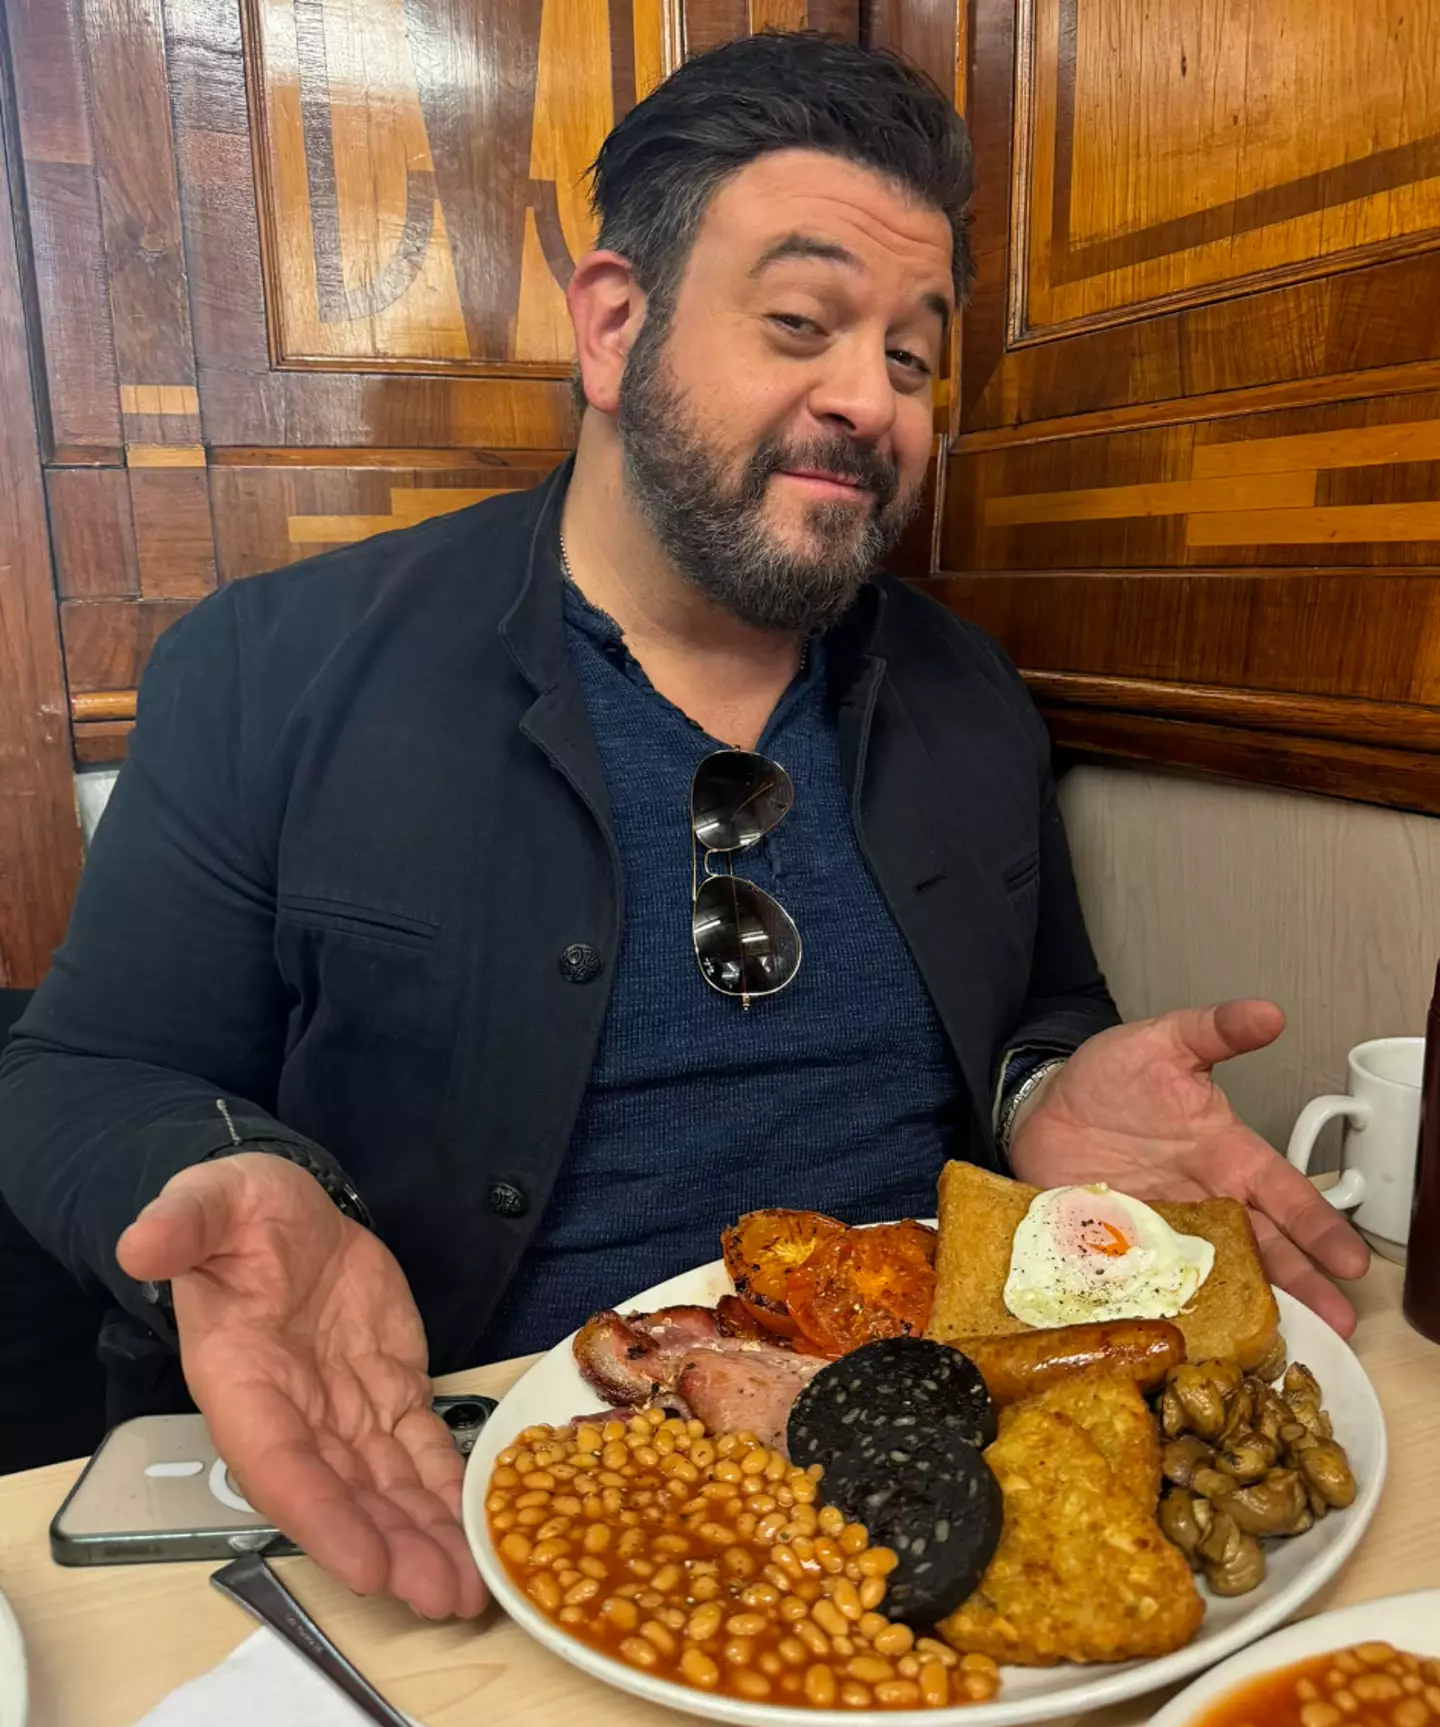 Adam Richman posing proudly with his Full English.